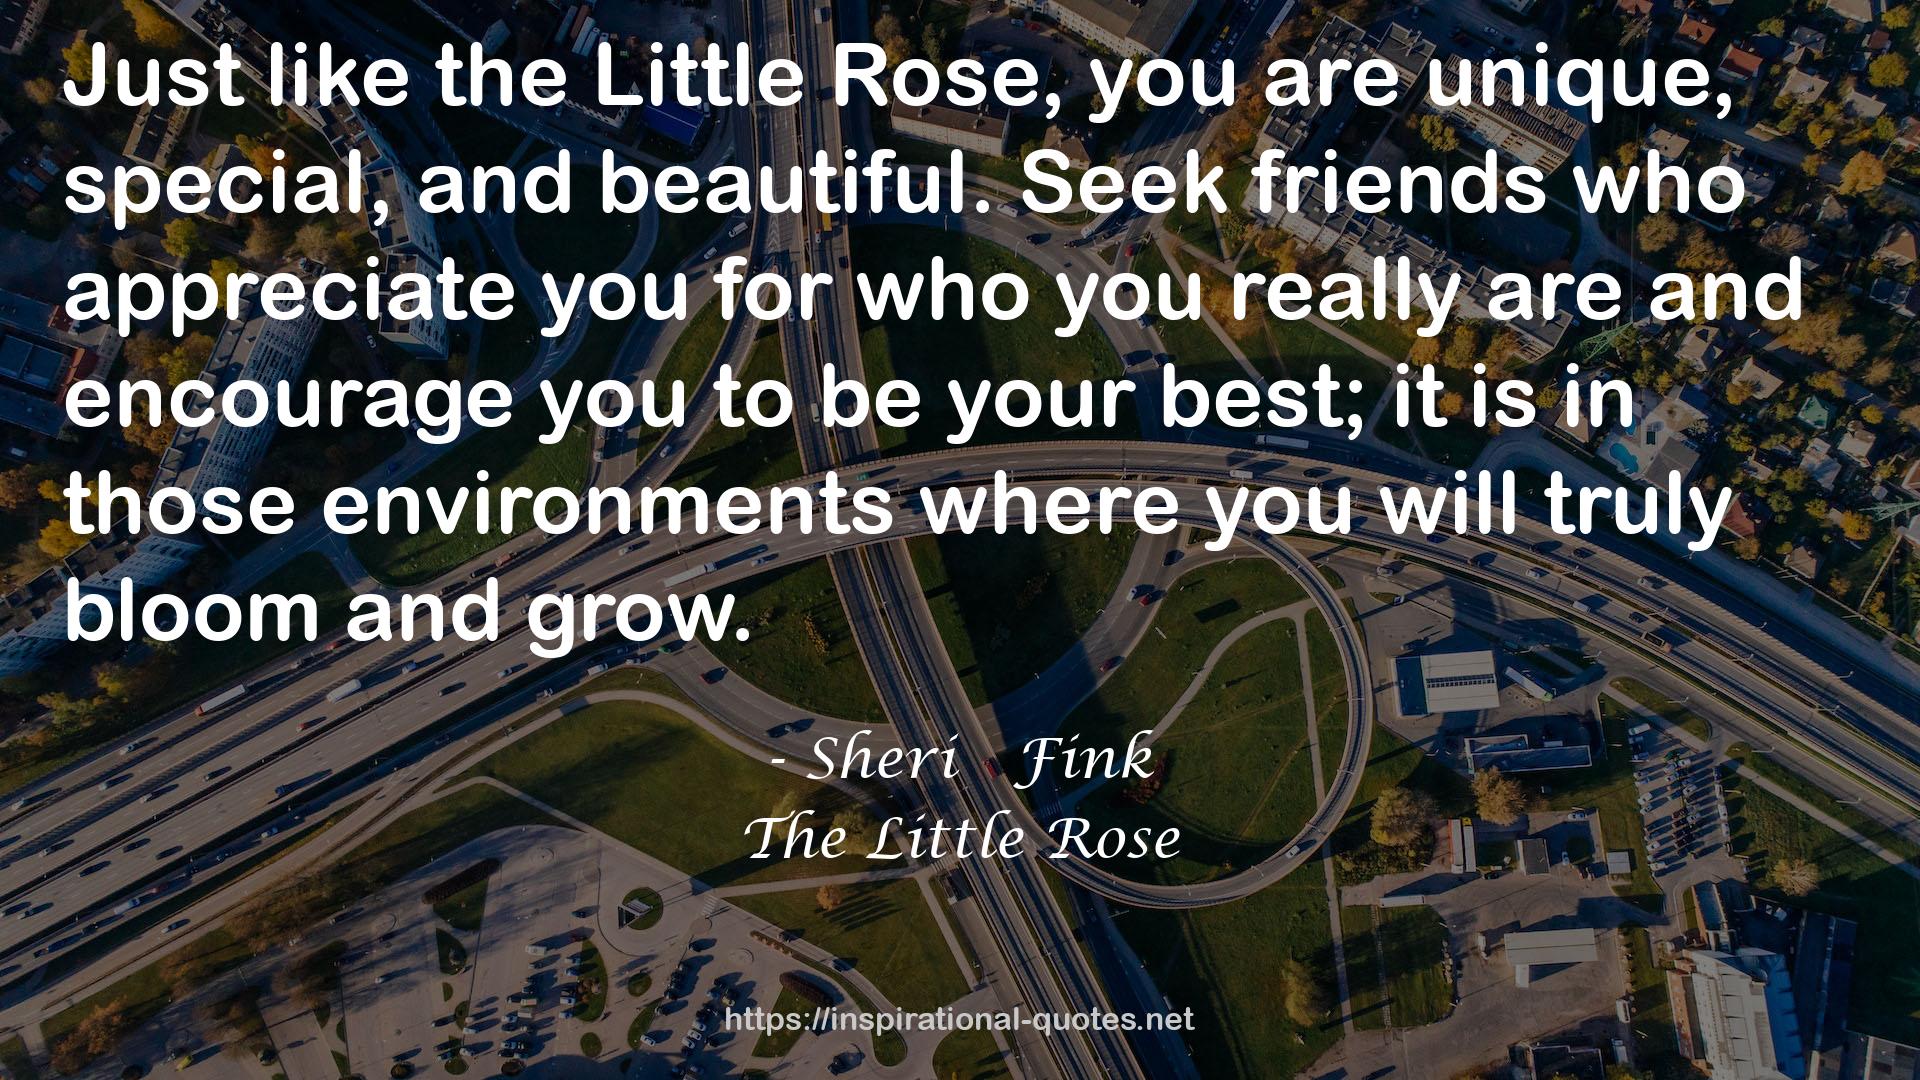 The Little Rose QUOTES